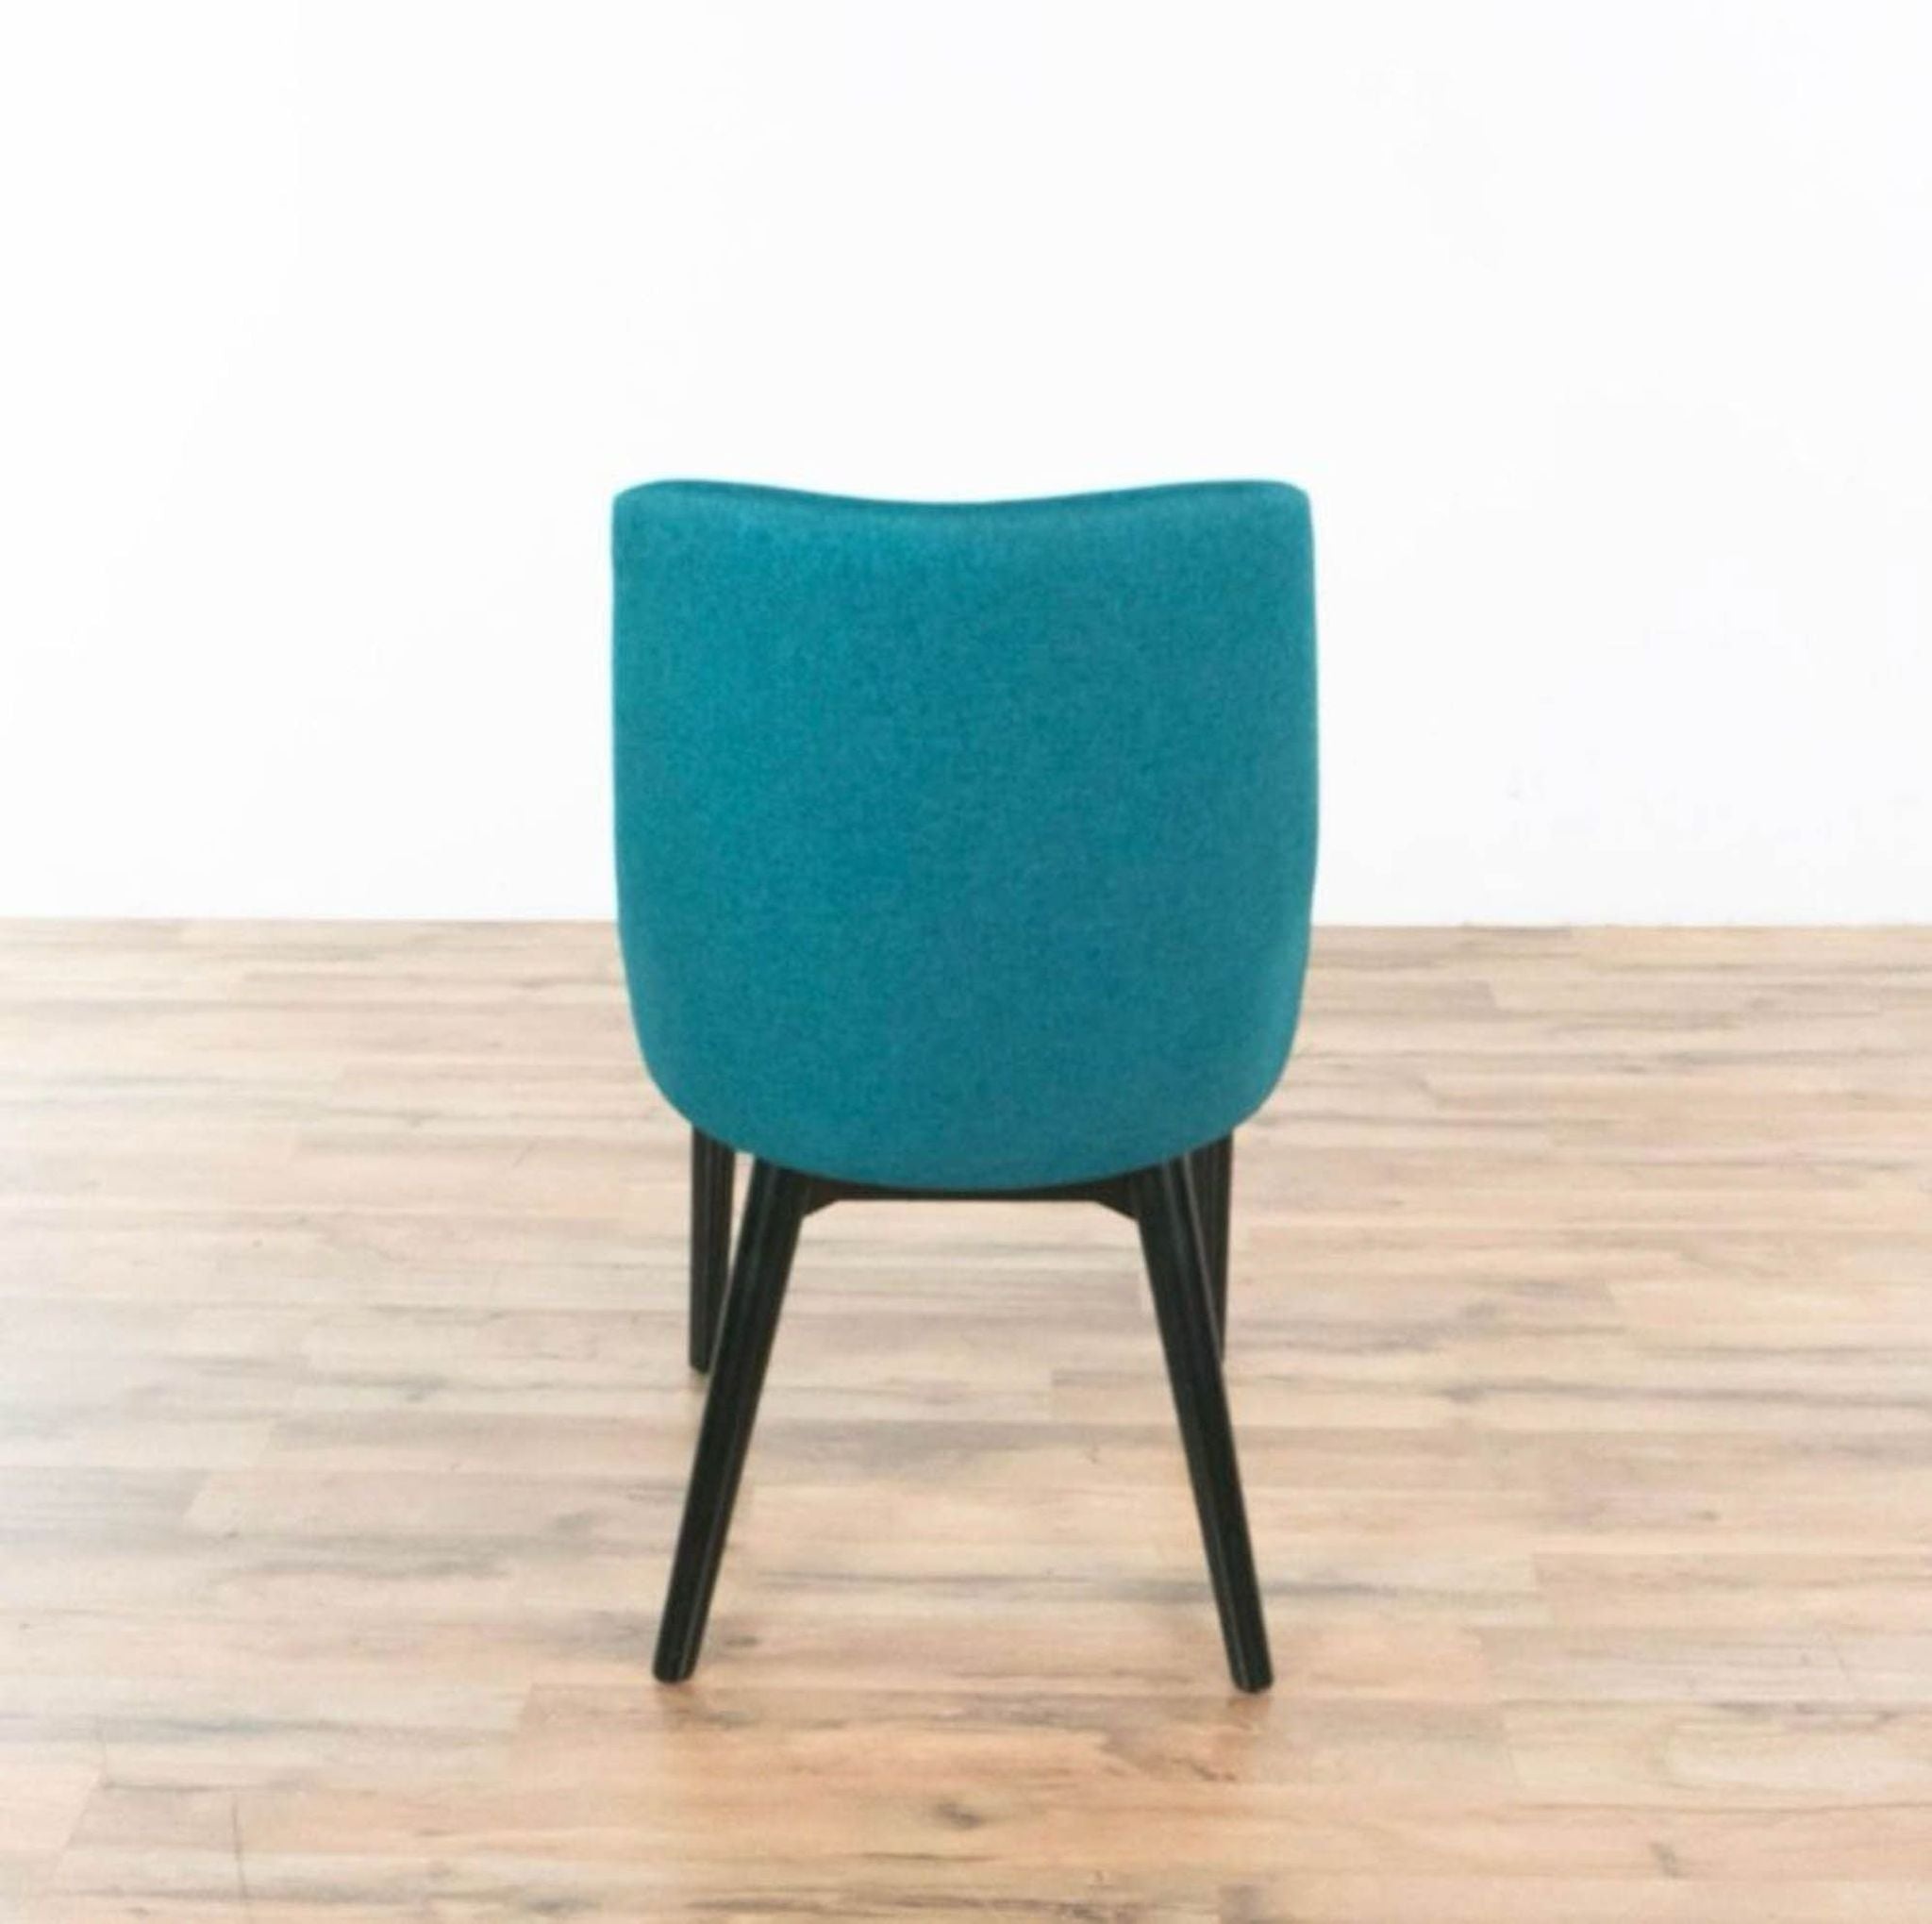 Modern StealMod Viscount side chair with teal upholstery and black tapered wood legs.